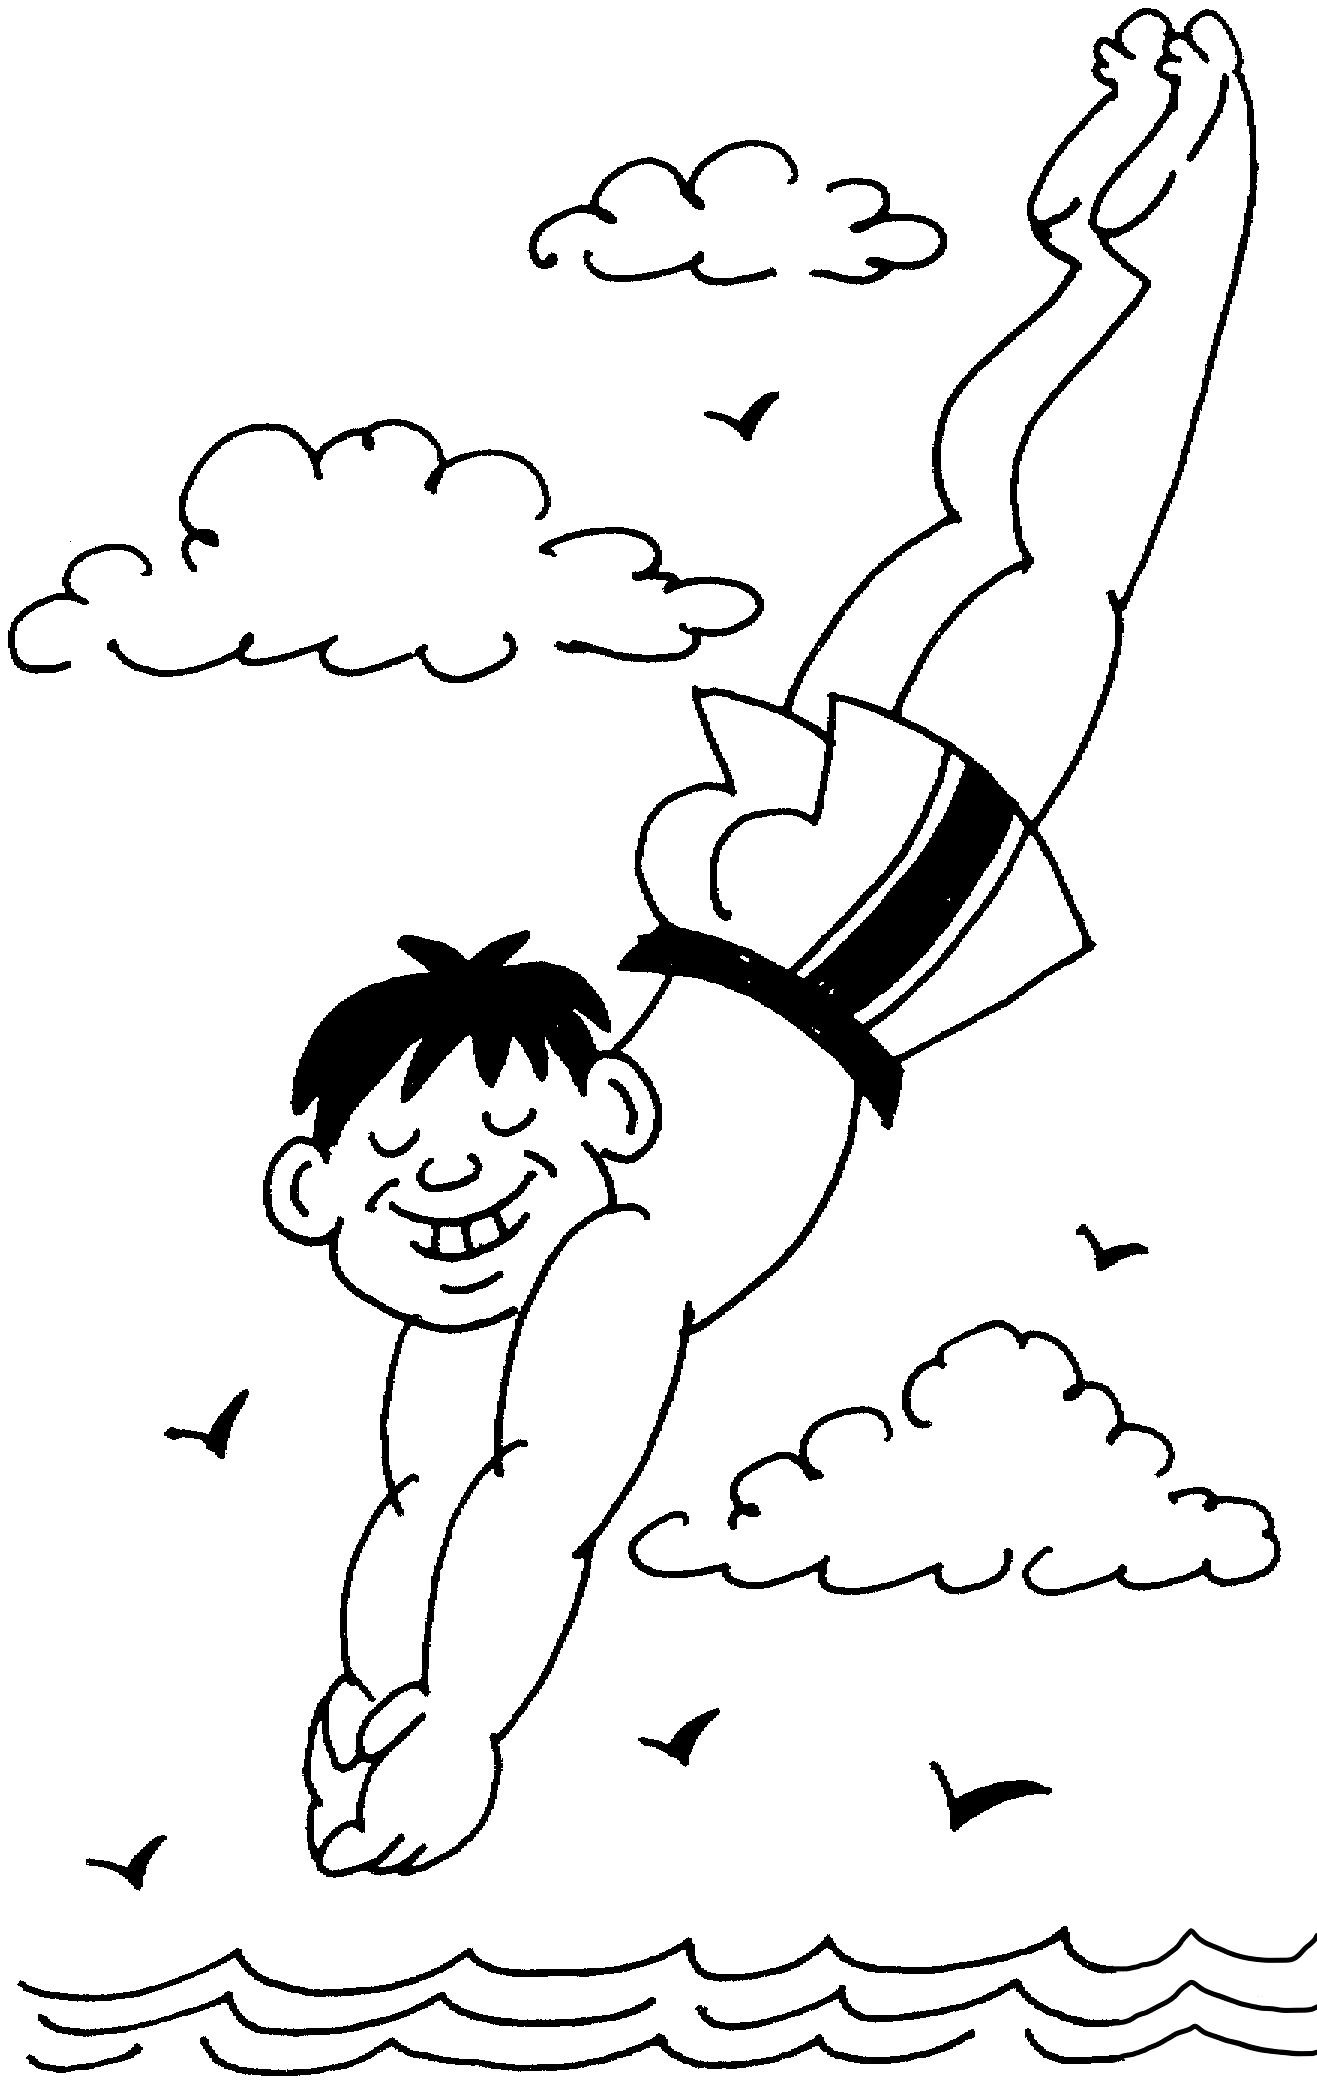 A Guy Jump Coloring Page - Free Printable Coloring Pages for Kids